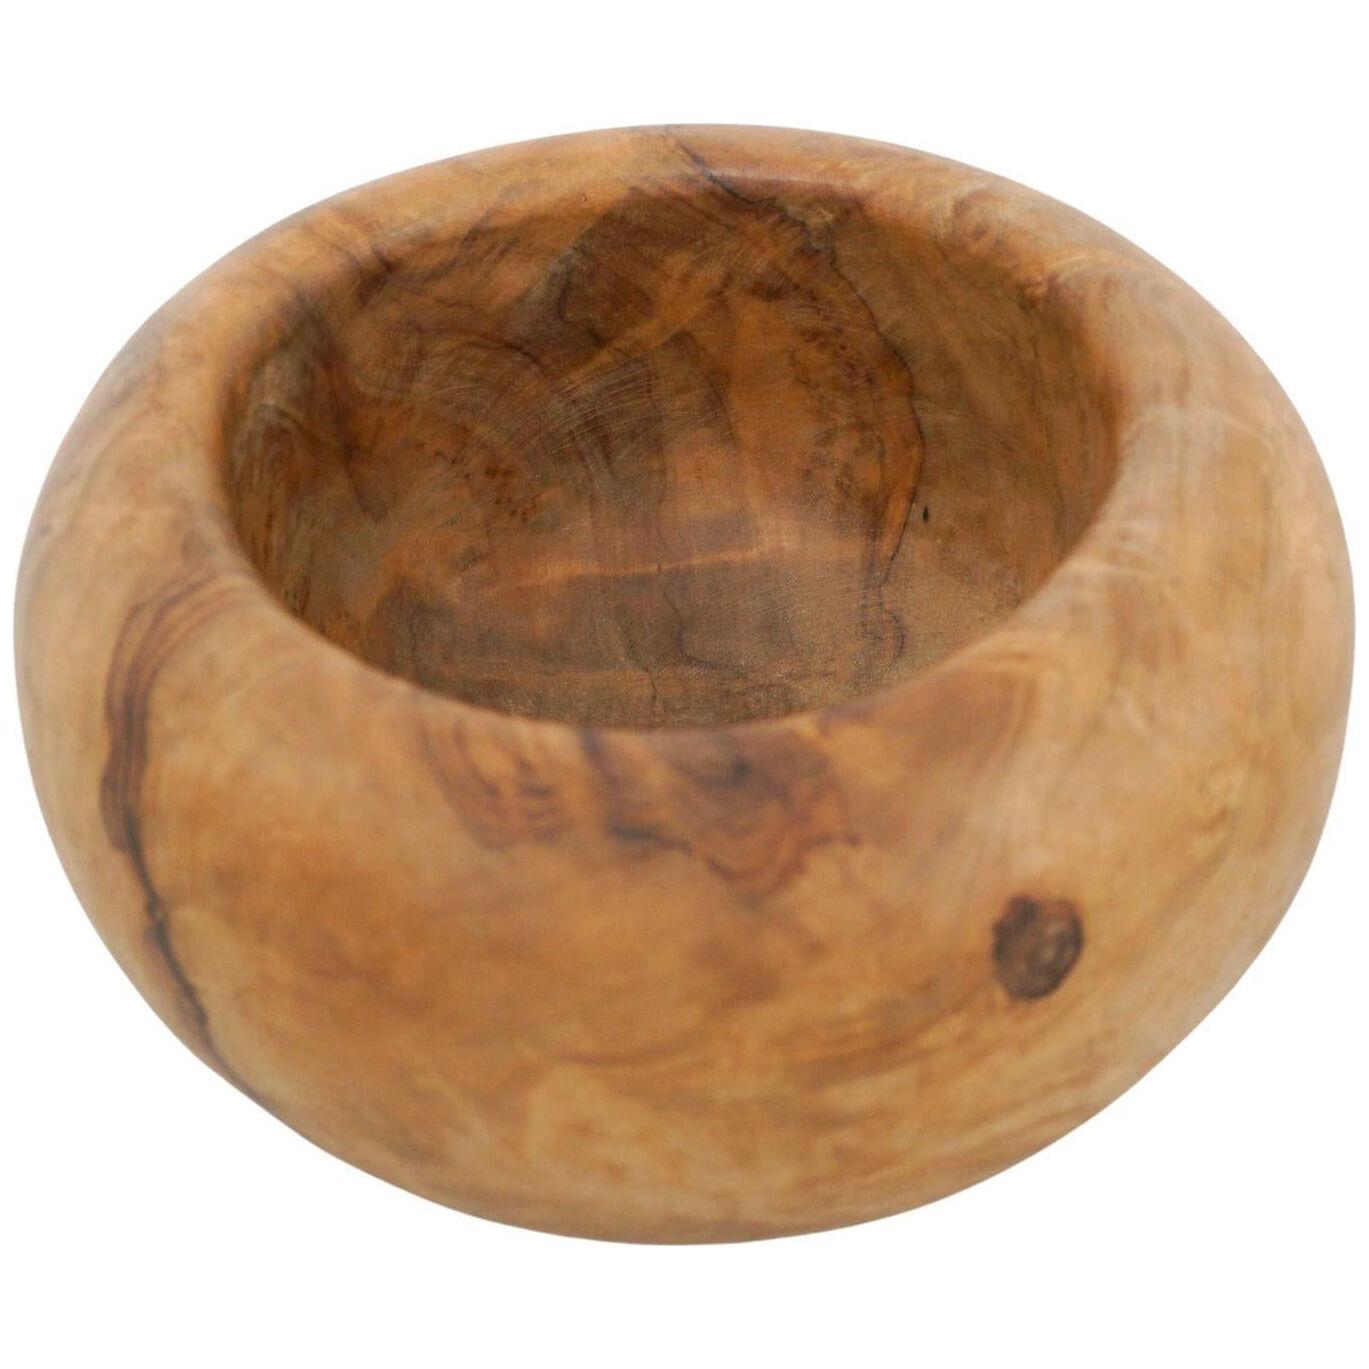 Early 20th Century Spanish Traditional Olive Wood Bowl